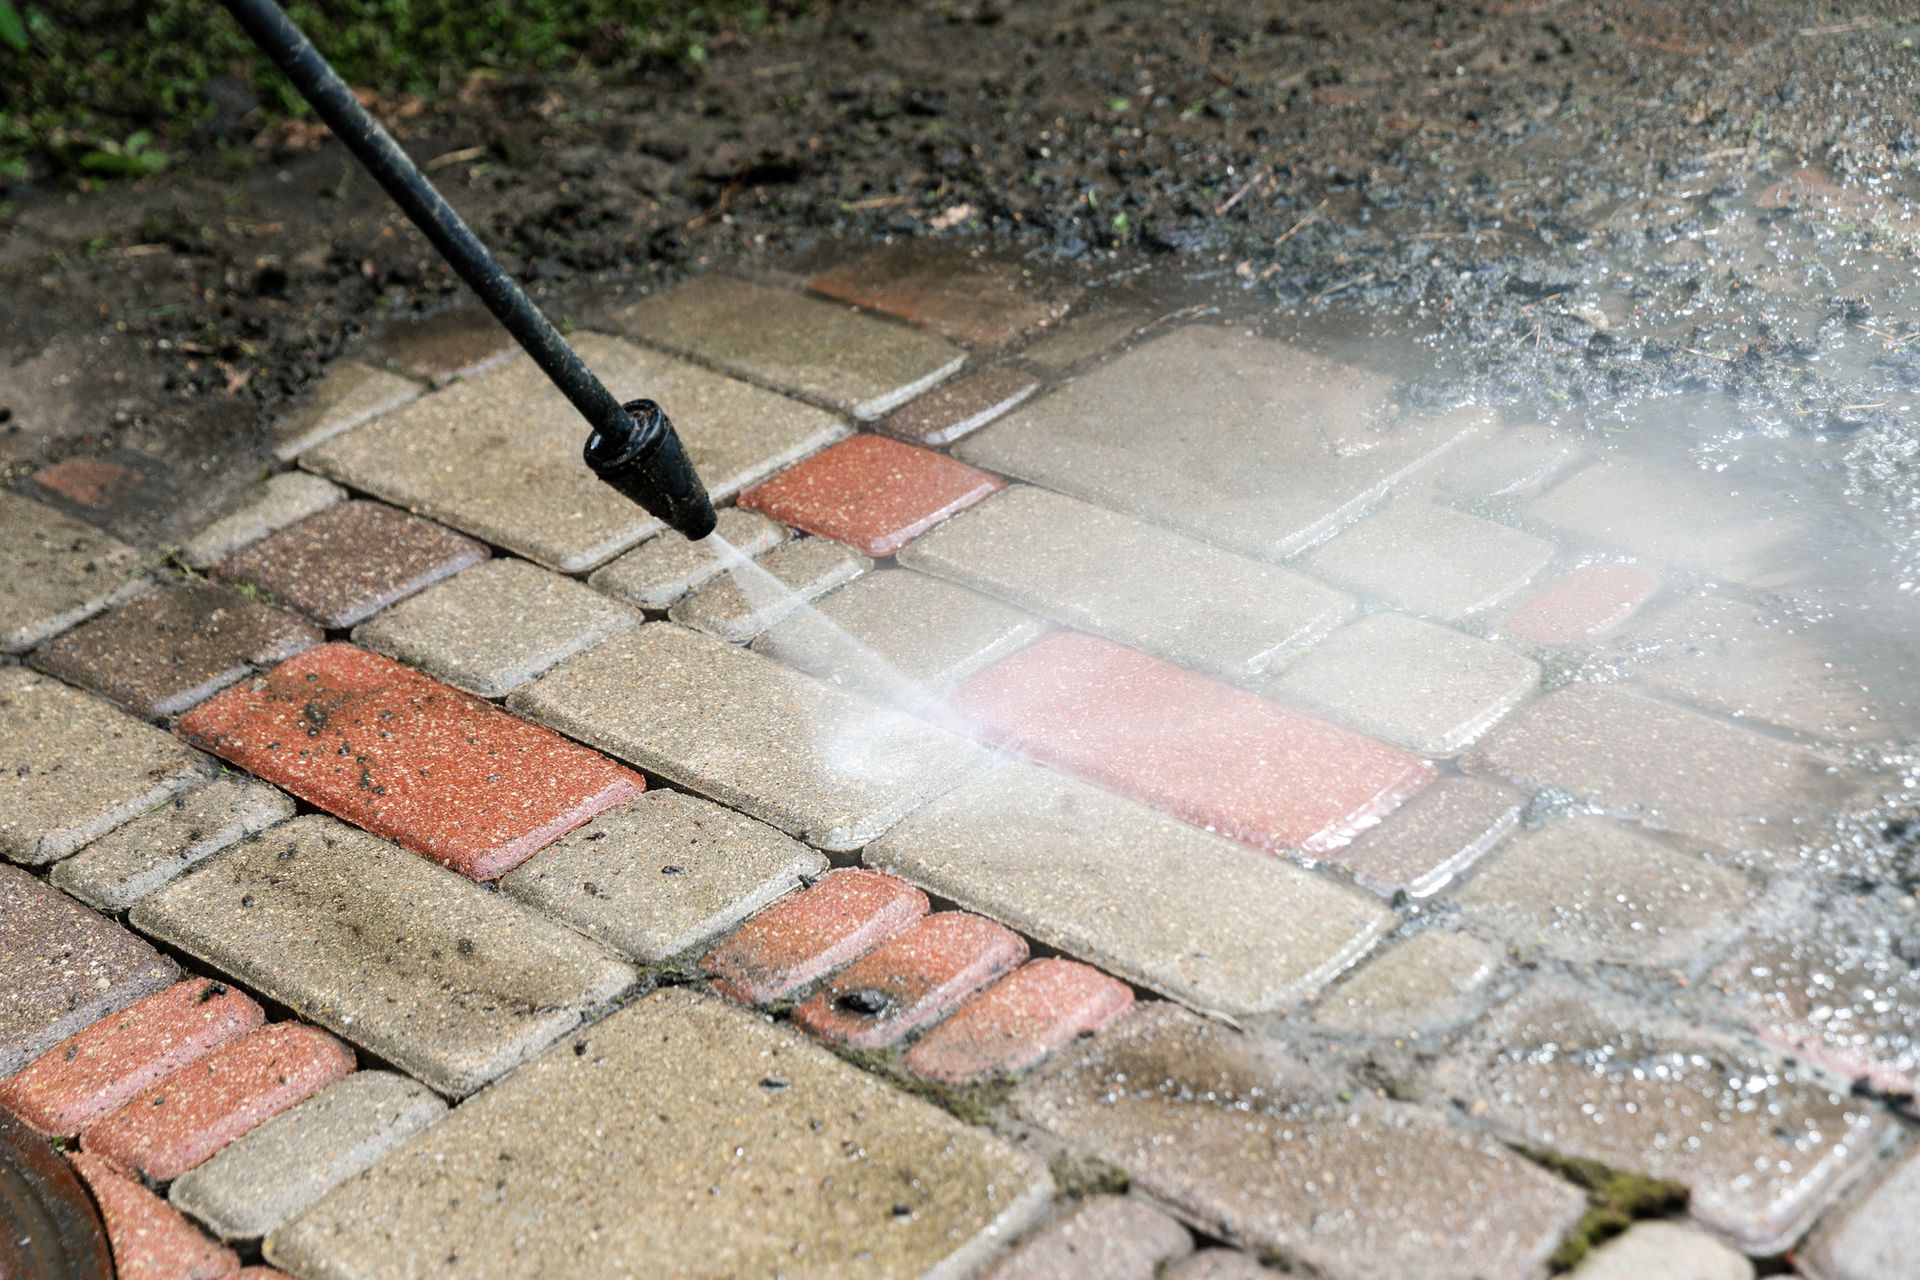 A person is using a high pressure washer to clean a brick walkway.